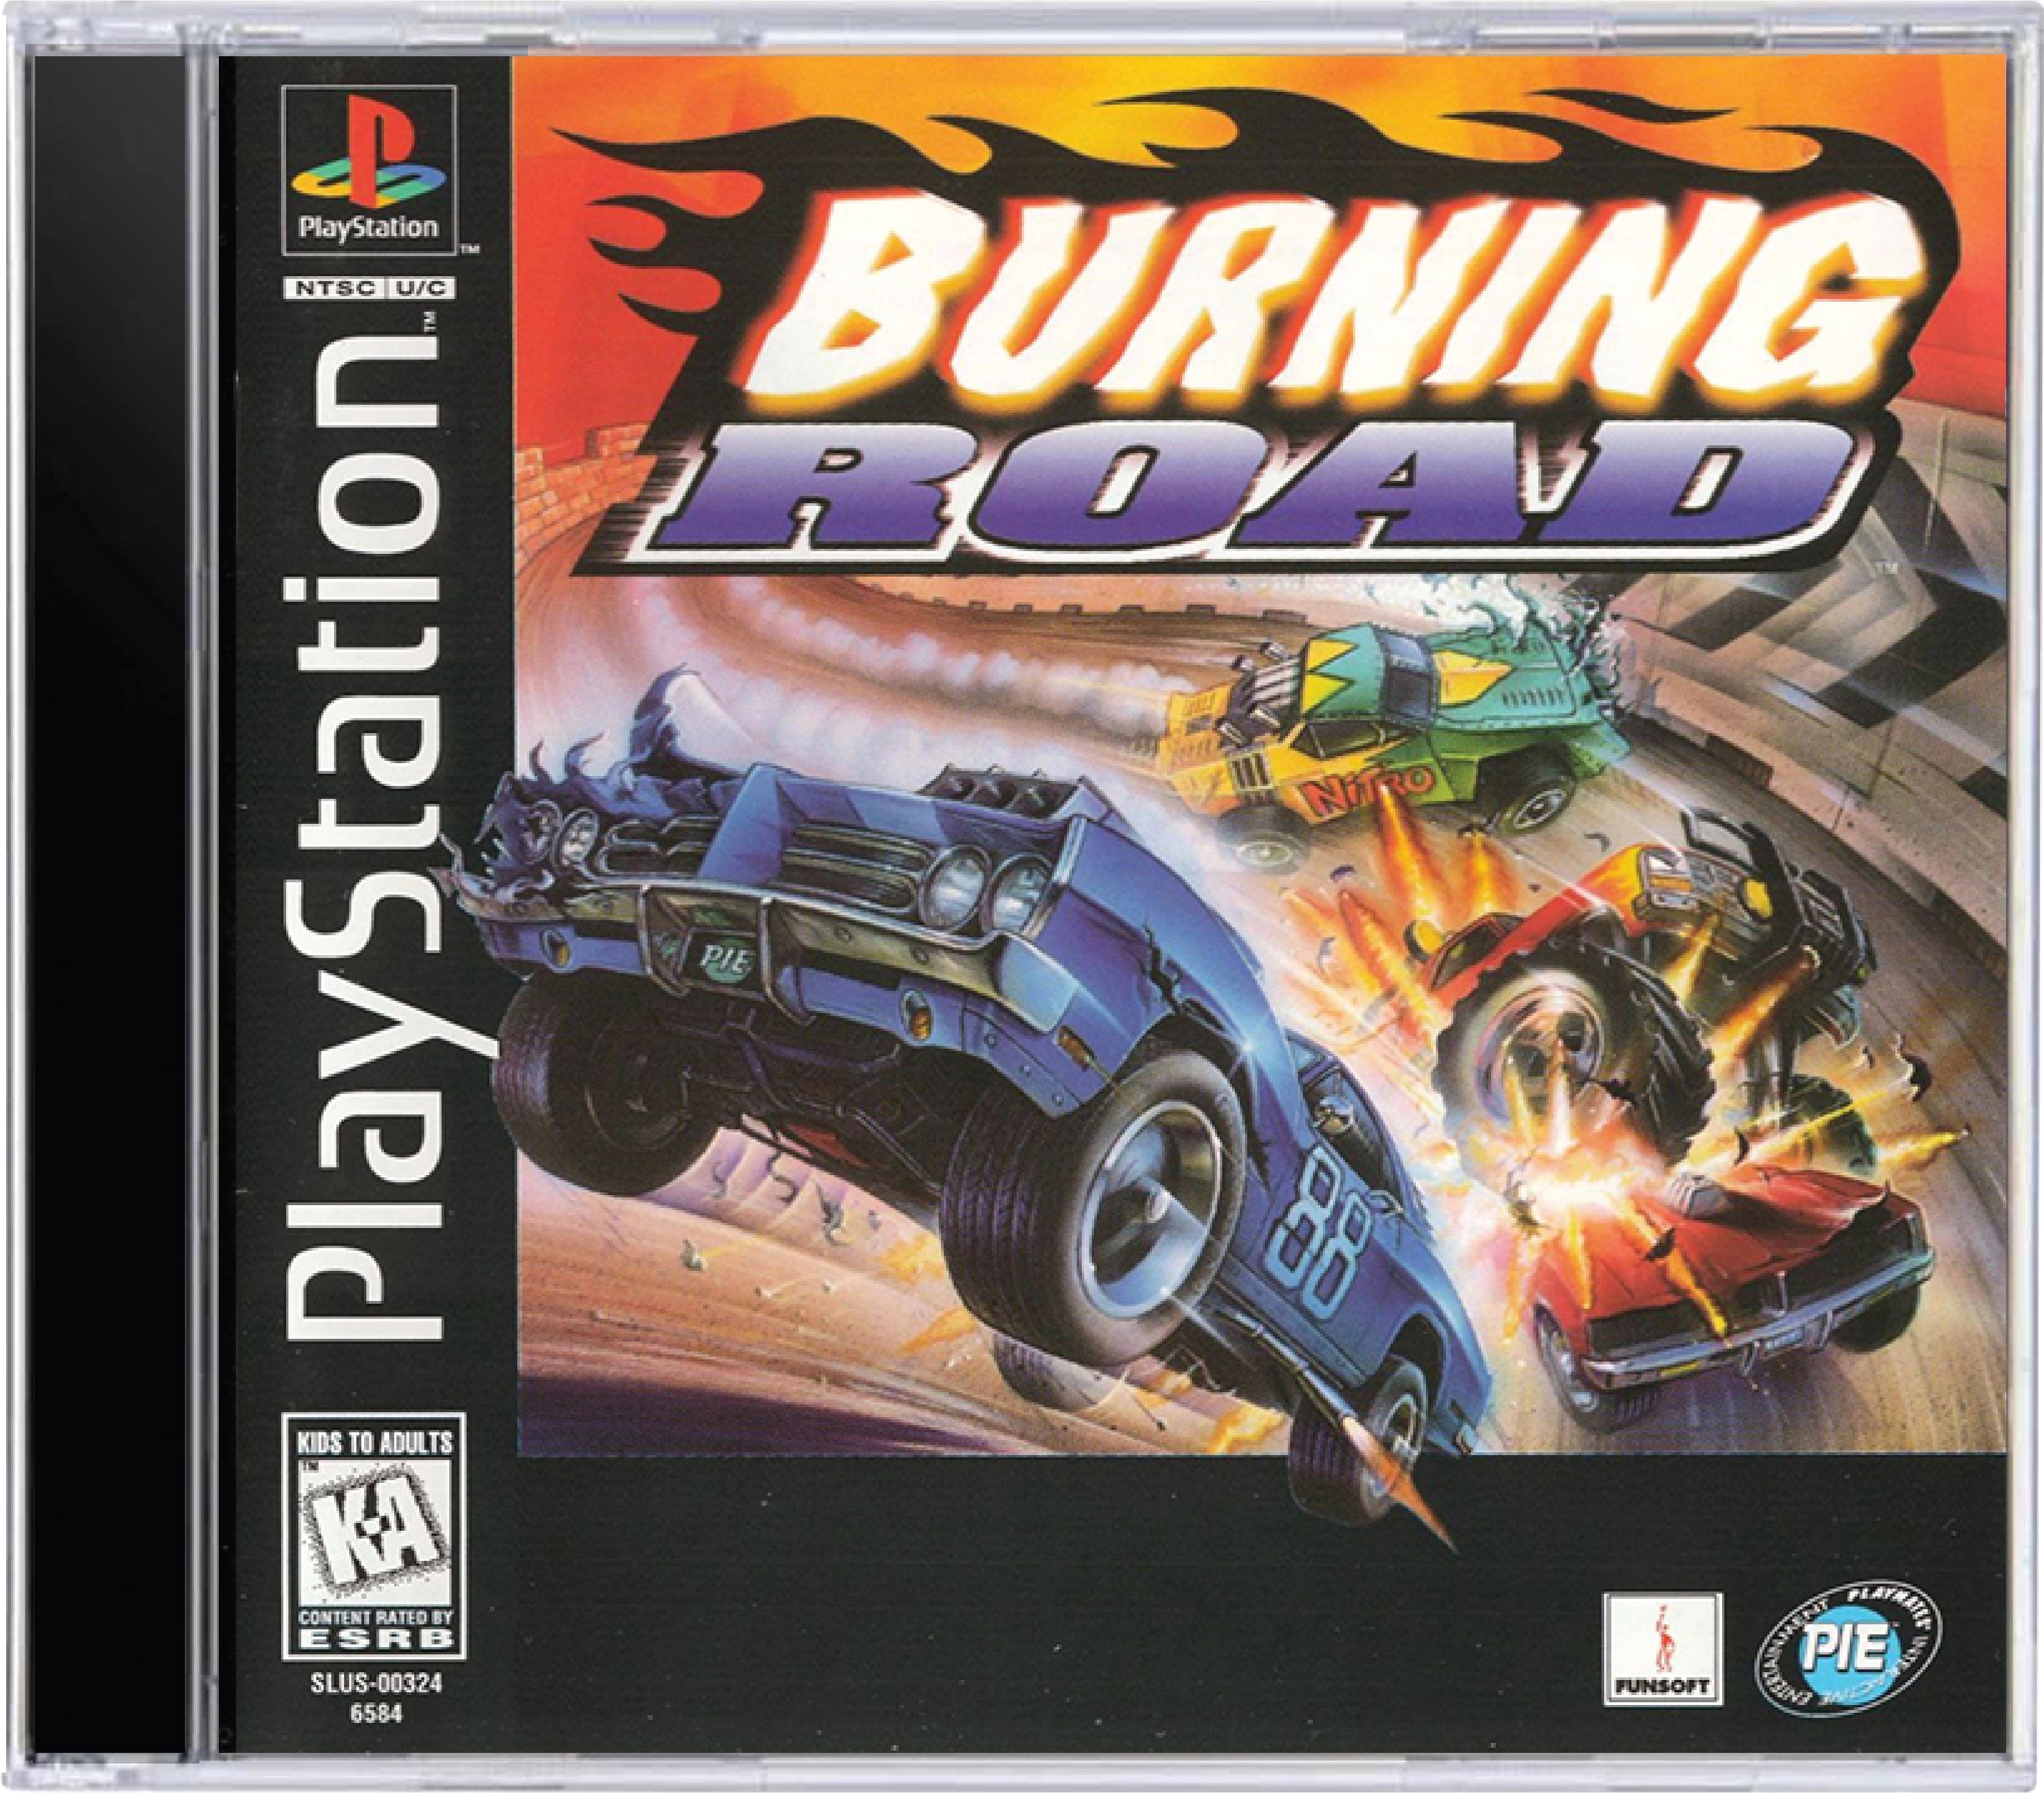 Burning Road Cover Art and Product Photo